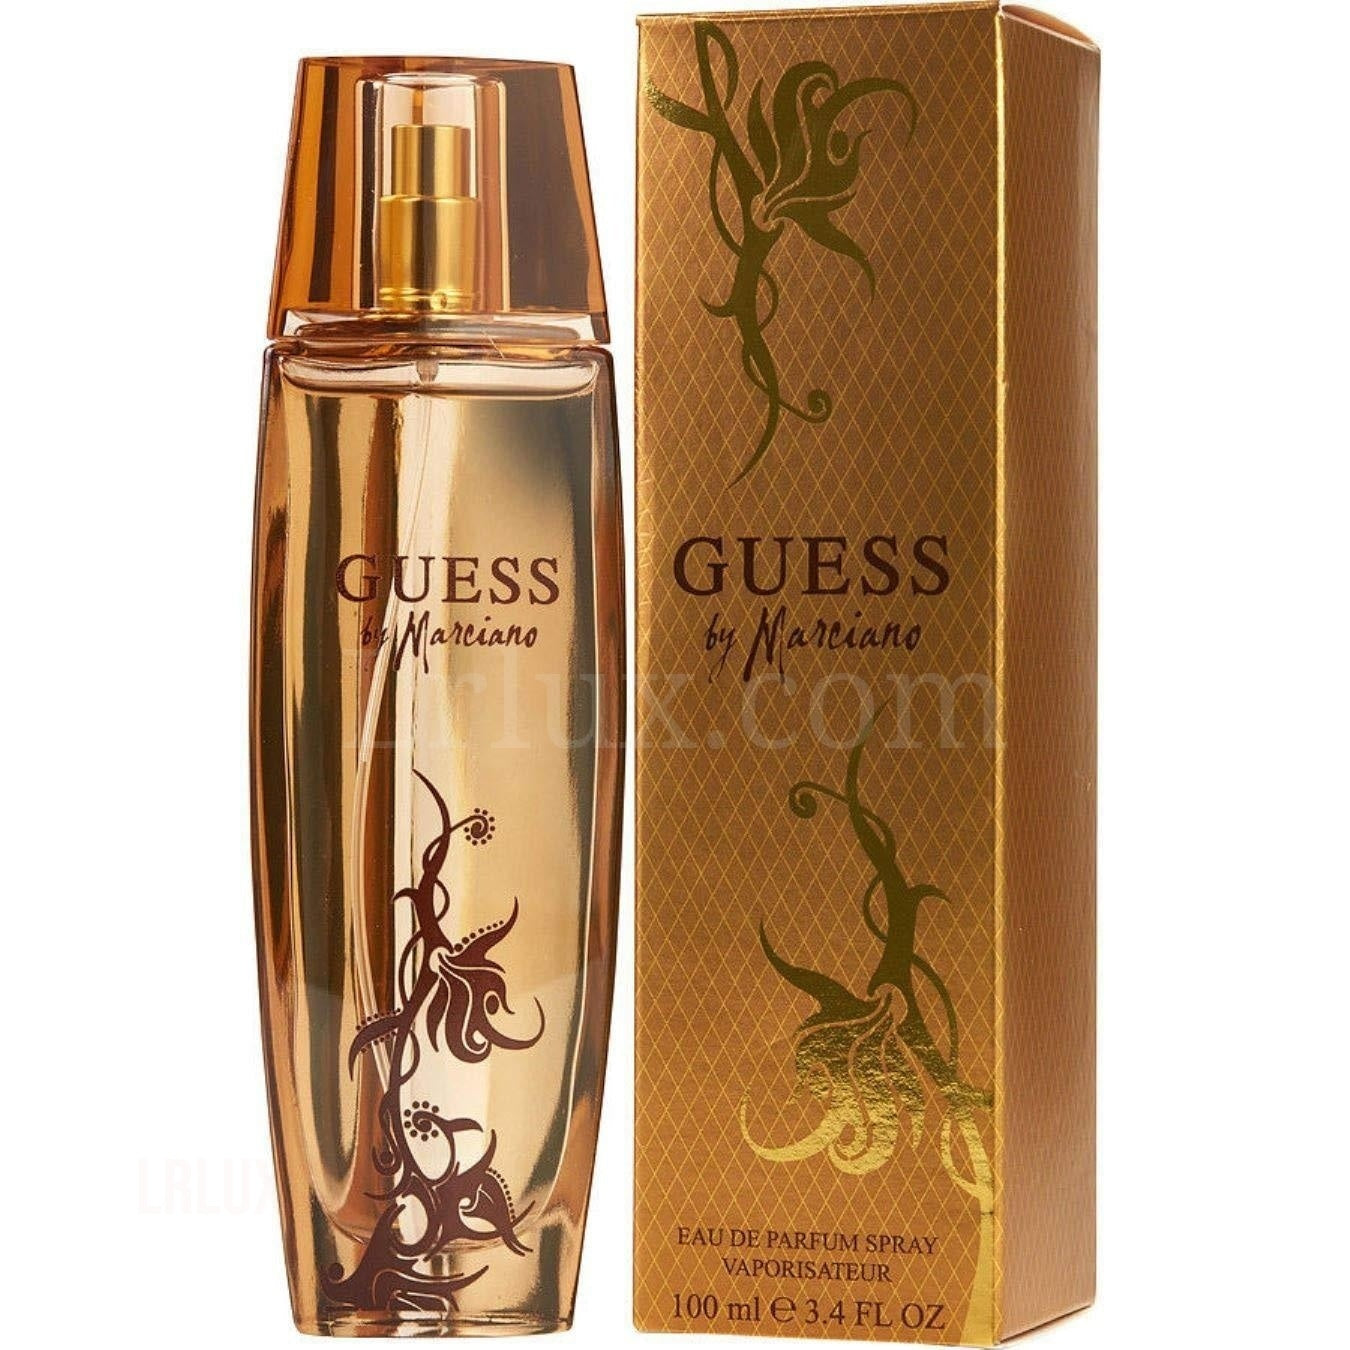 Guess by Marciano 3.4oz 100ml EDP Spray - Lrlux.com